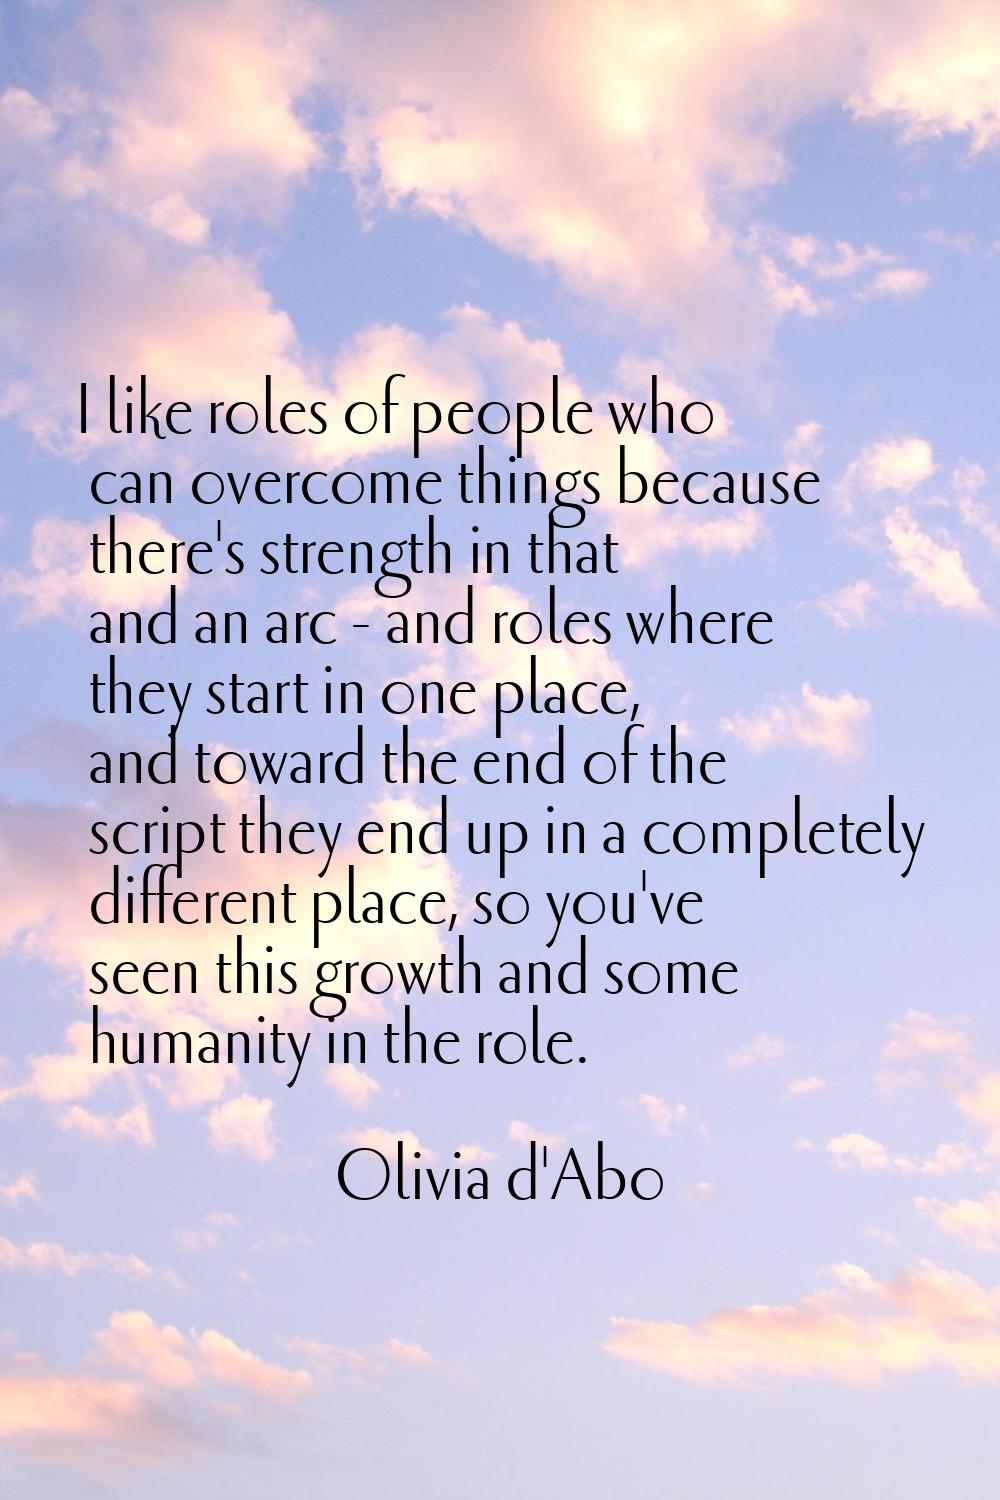 I like roles of people who can overcome things because there's strength in that and an arc - and ro